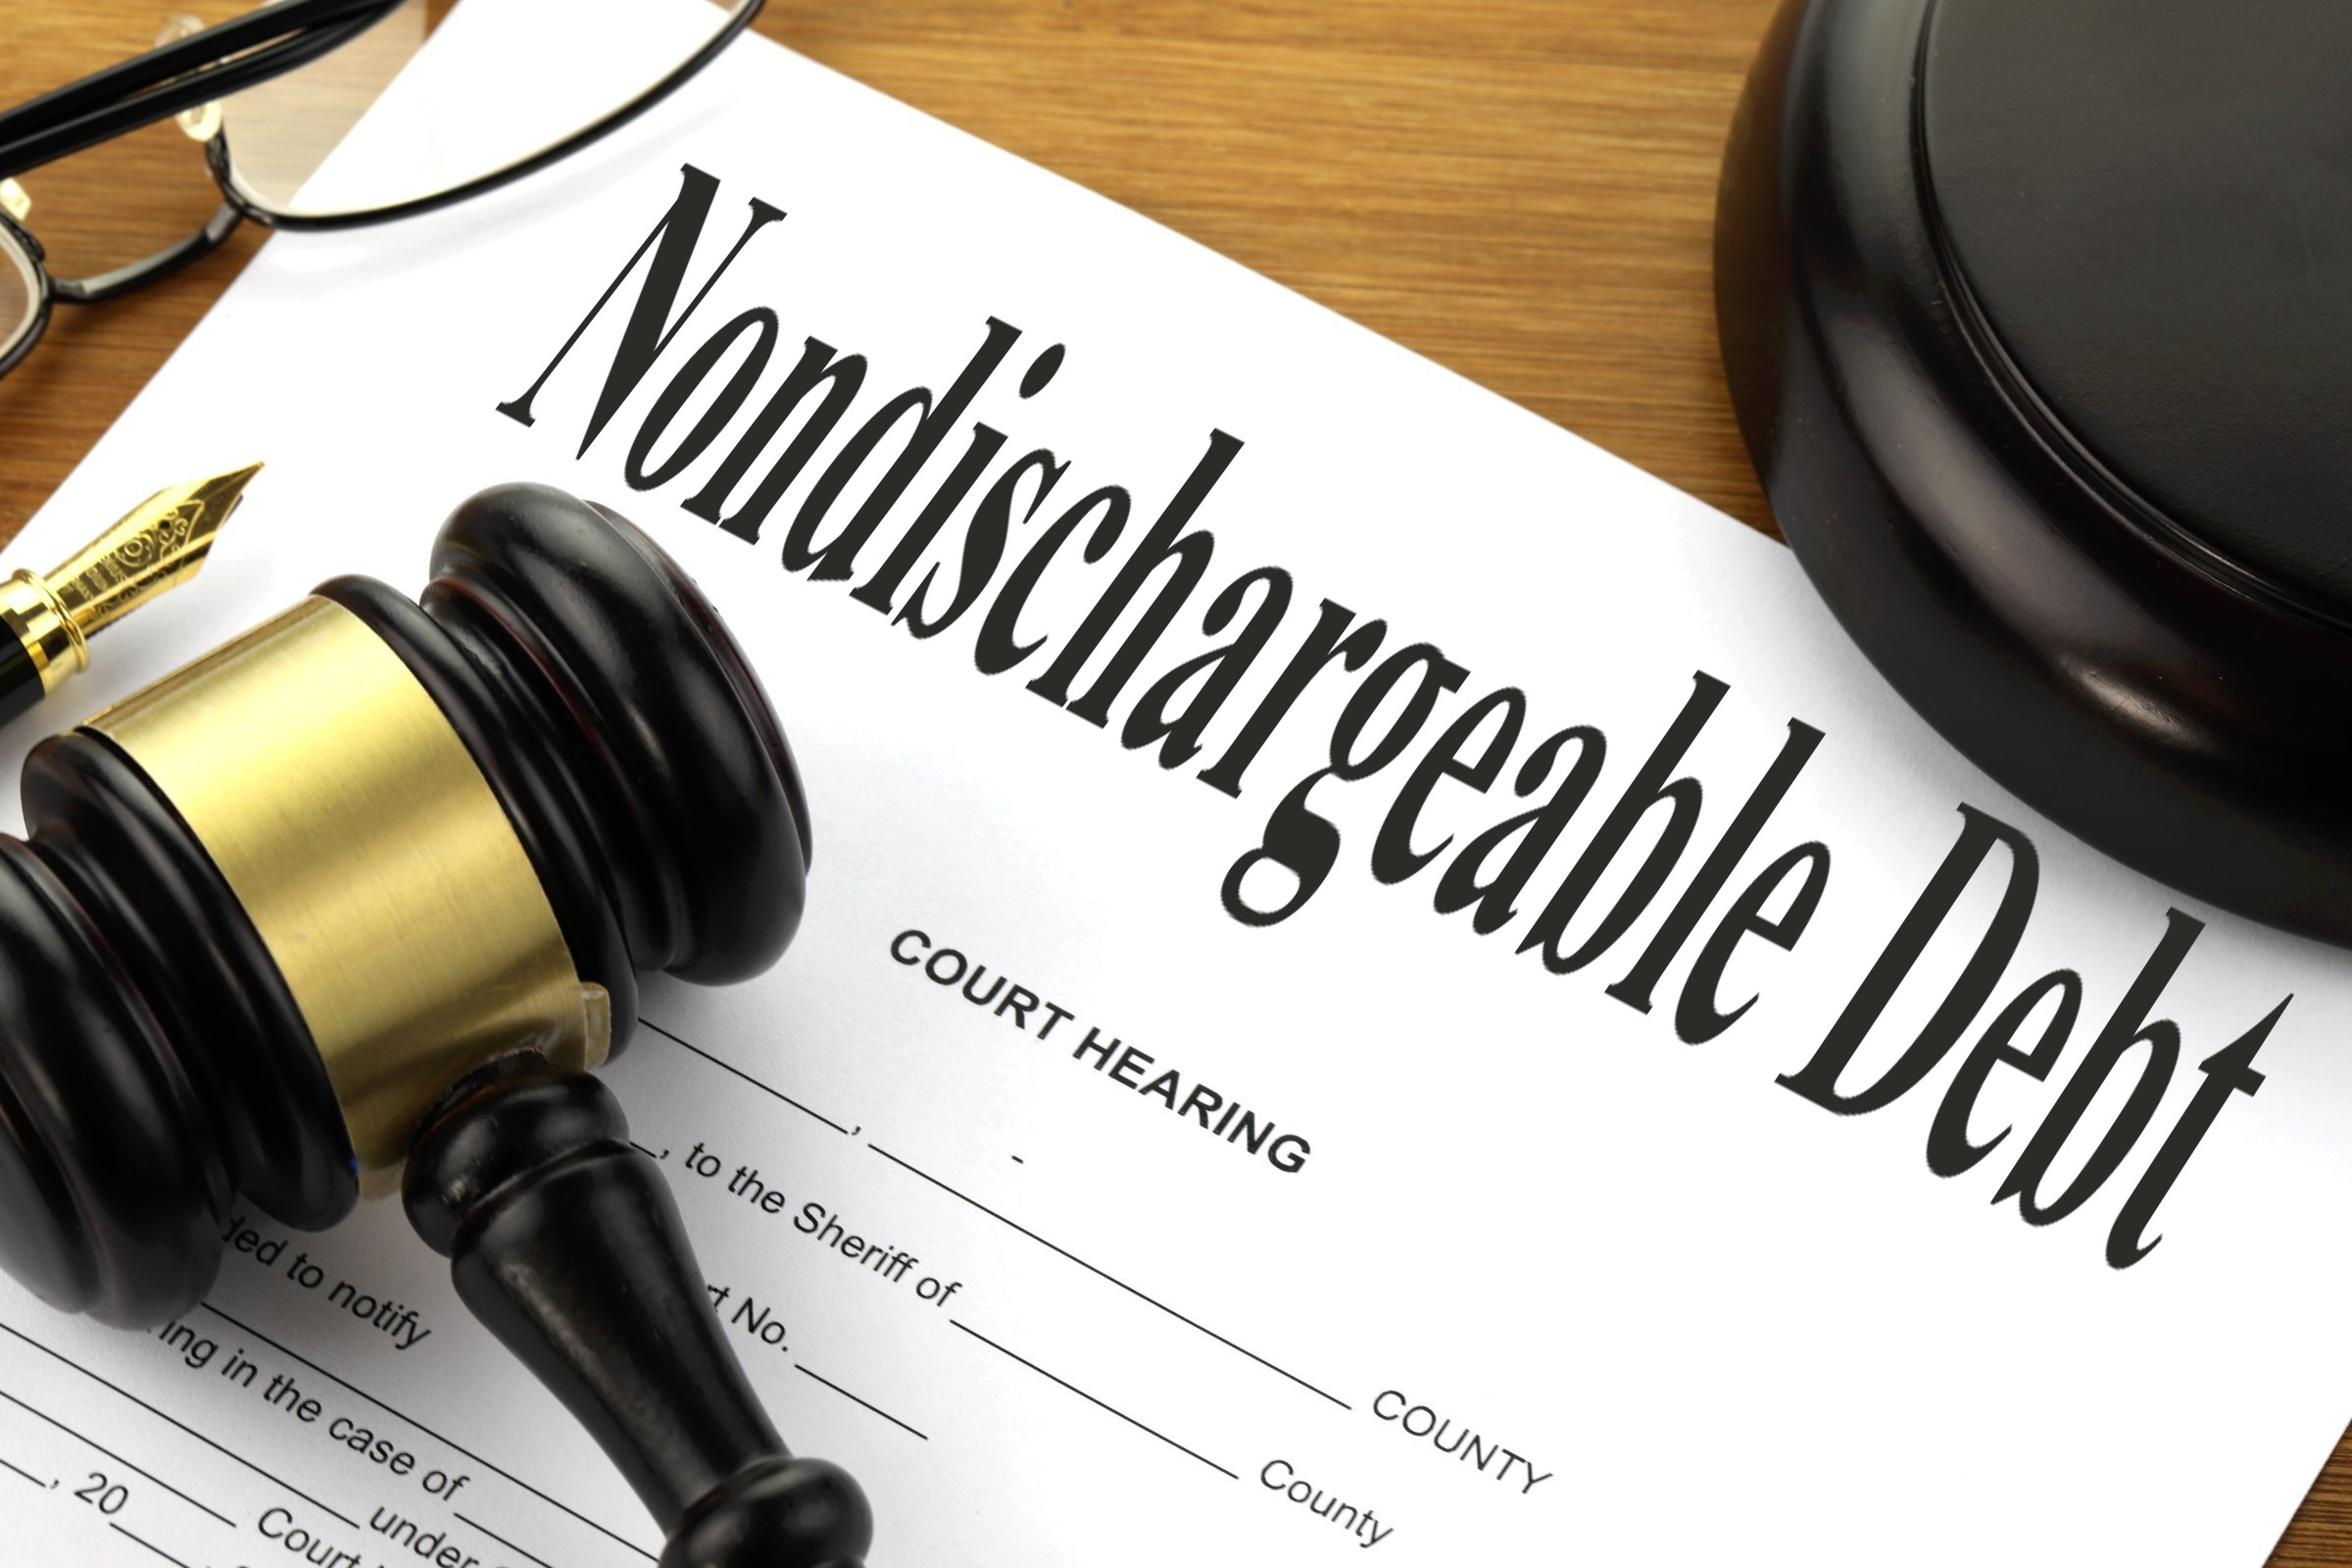 Nondischargeable Debt - Free of Charge Creative Commons Legal 1 image